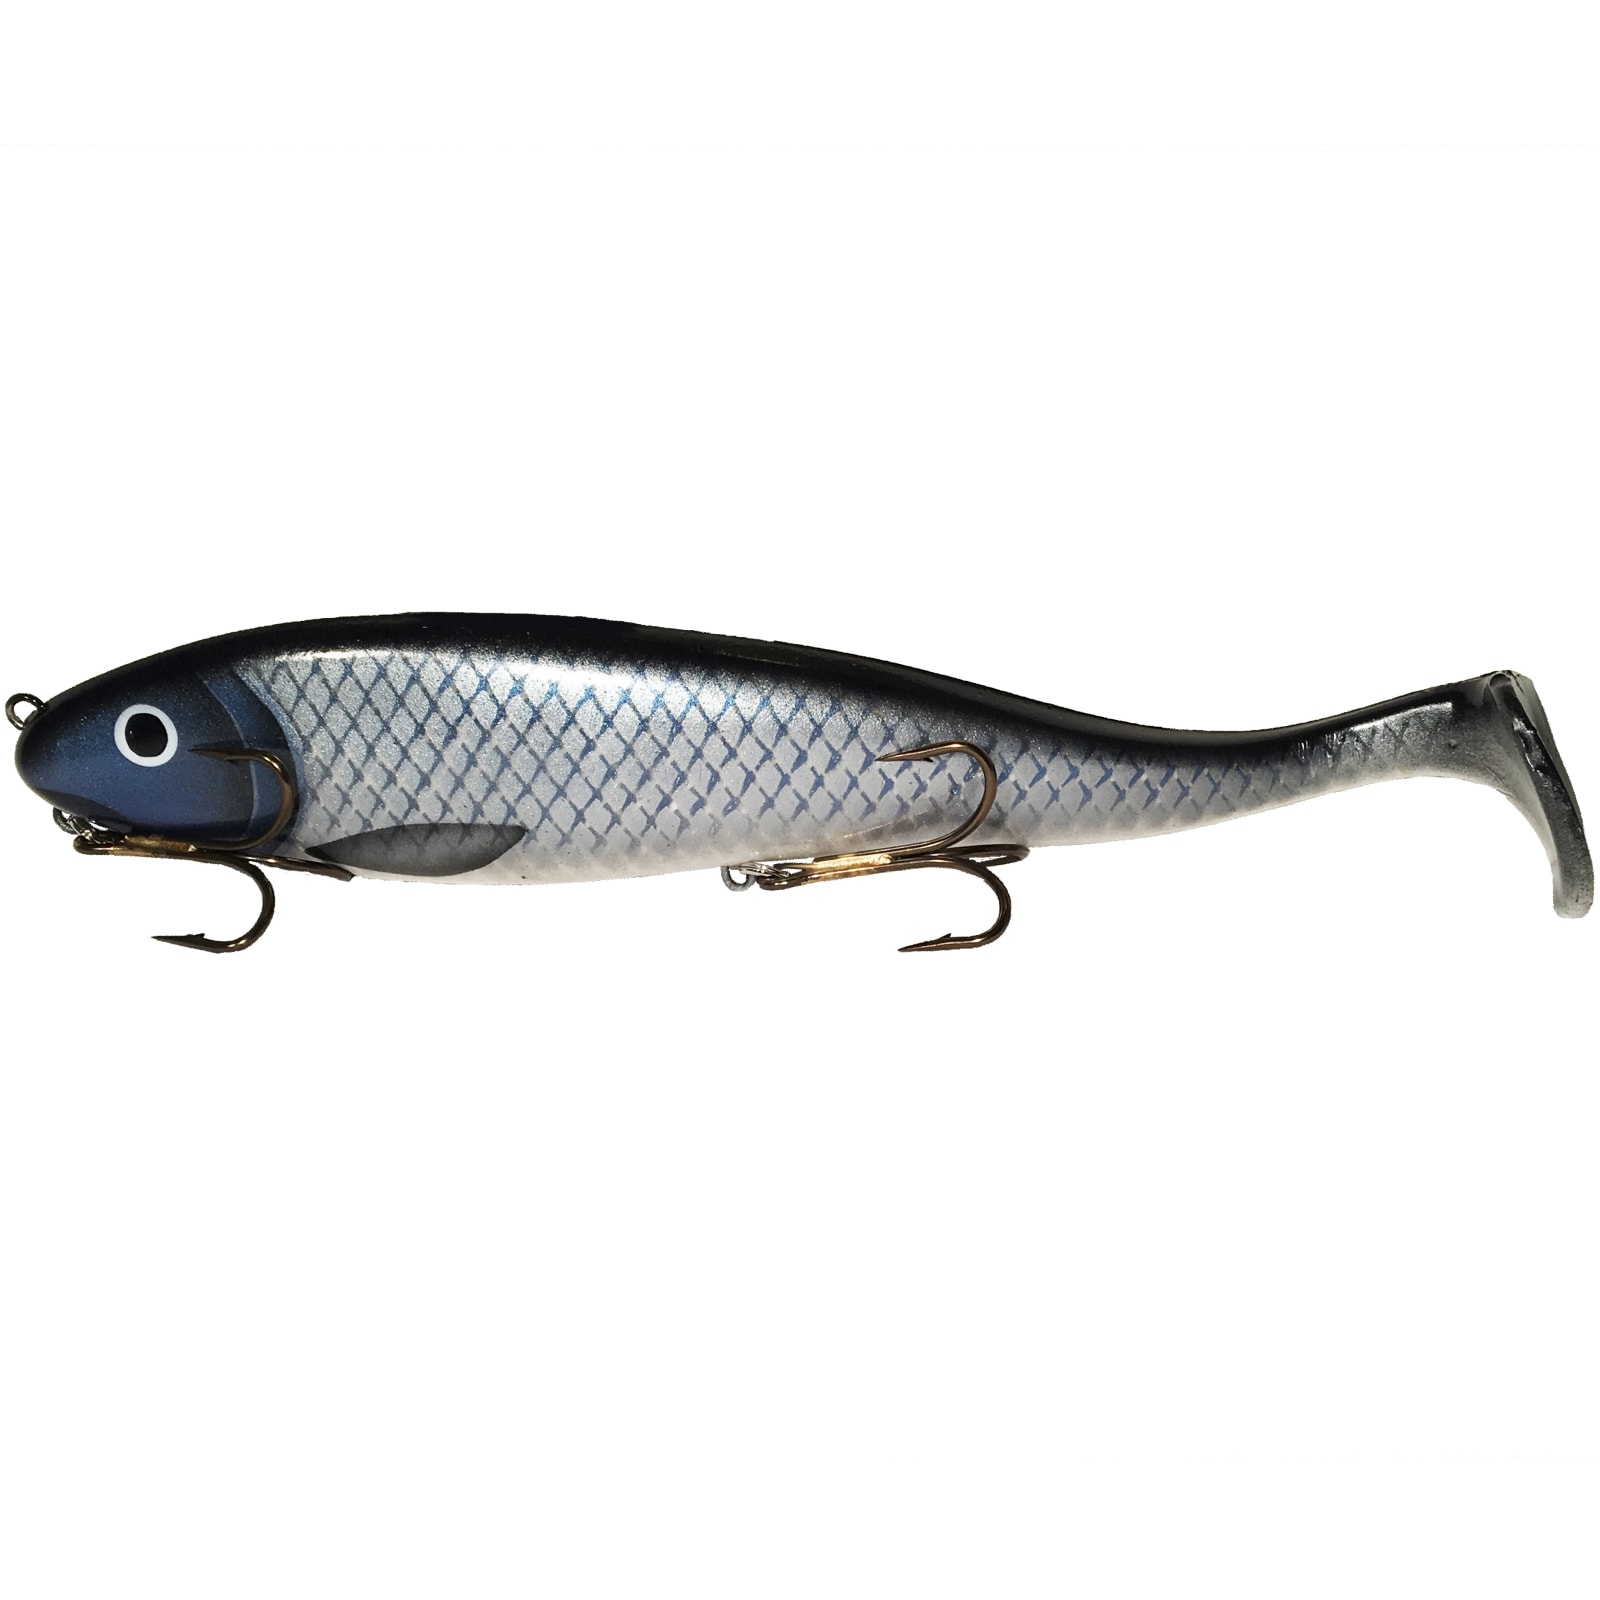 Magnum Swimmin' Dawg 11 in Whitefish Swim Bait by Musky